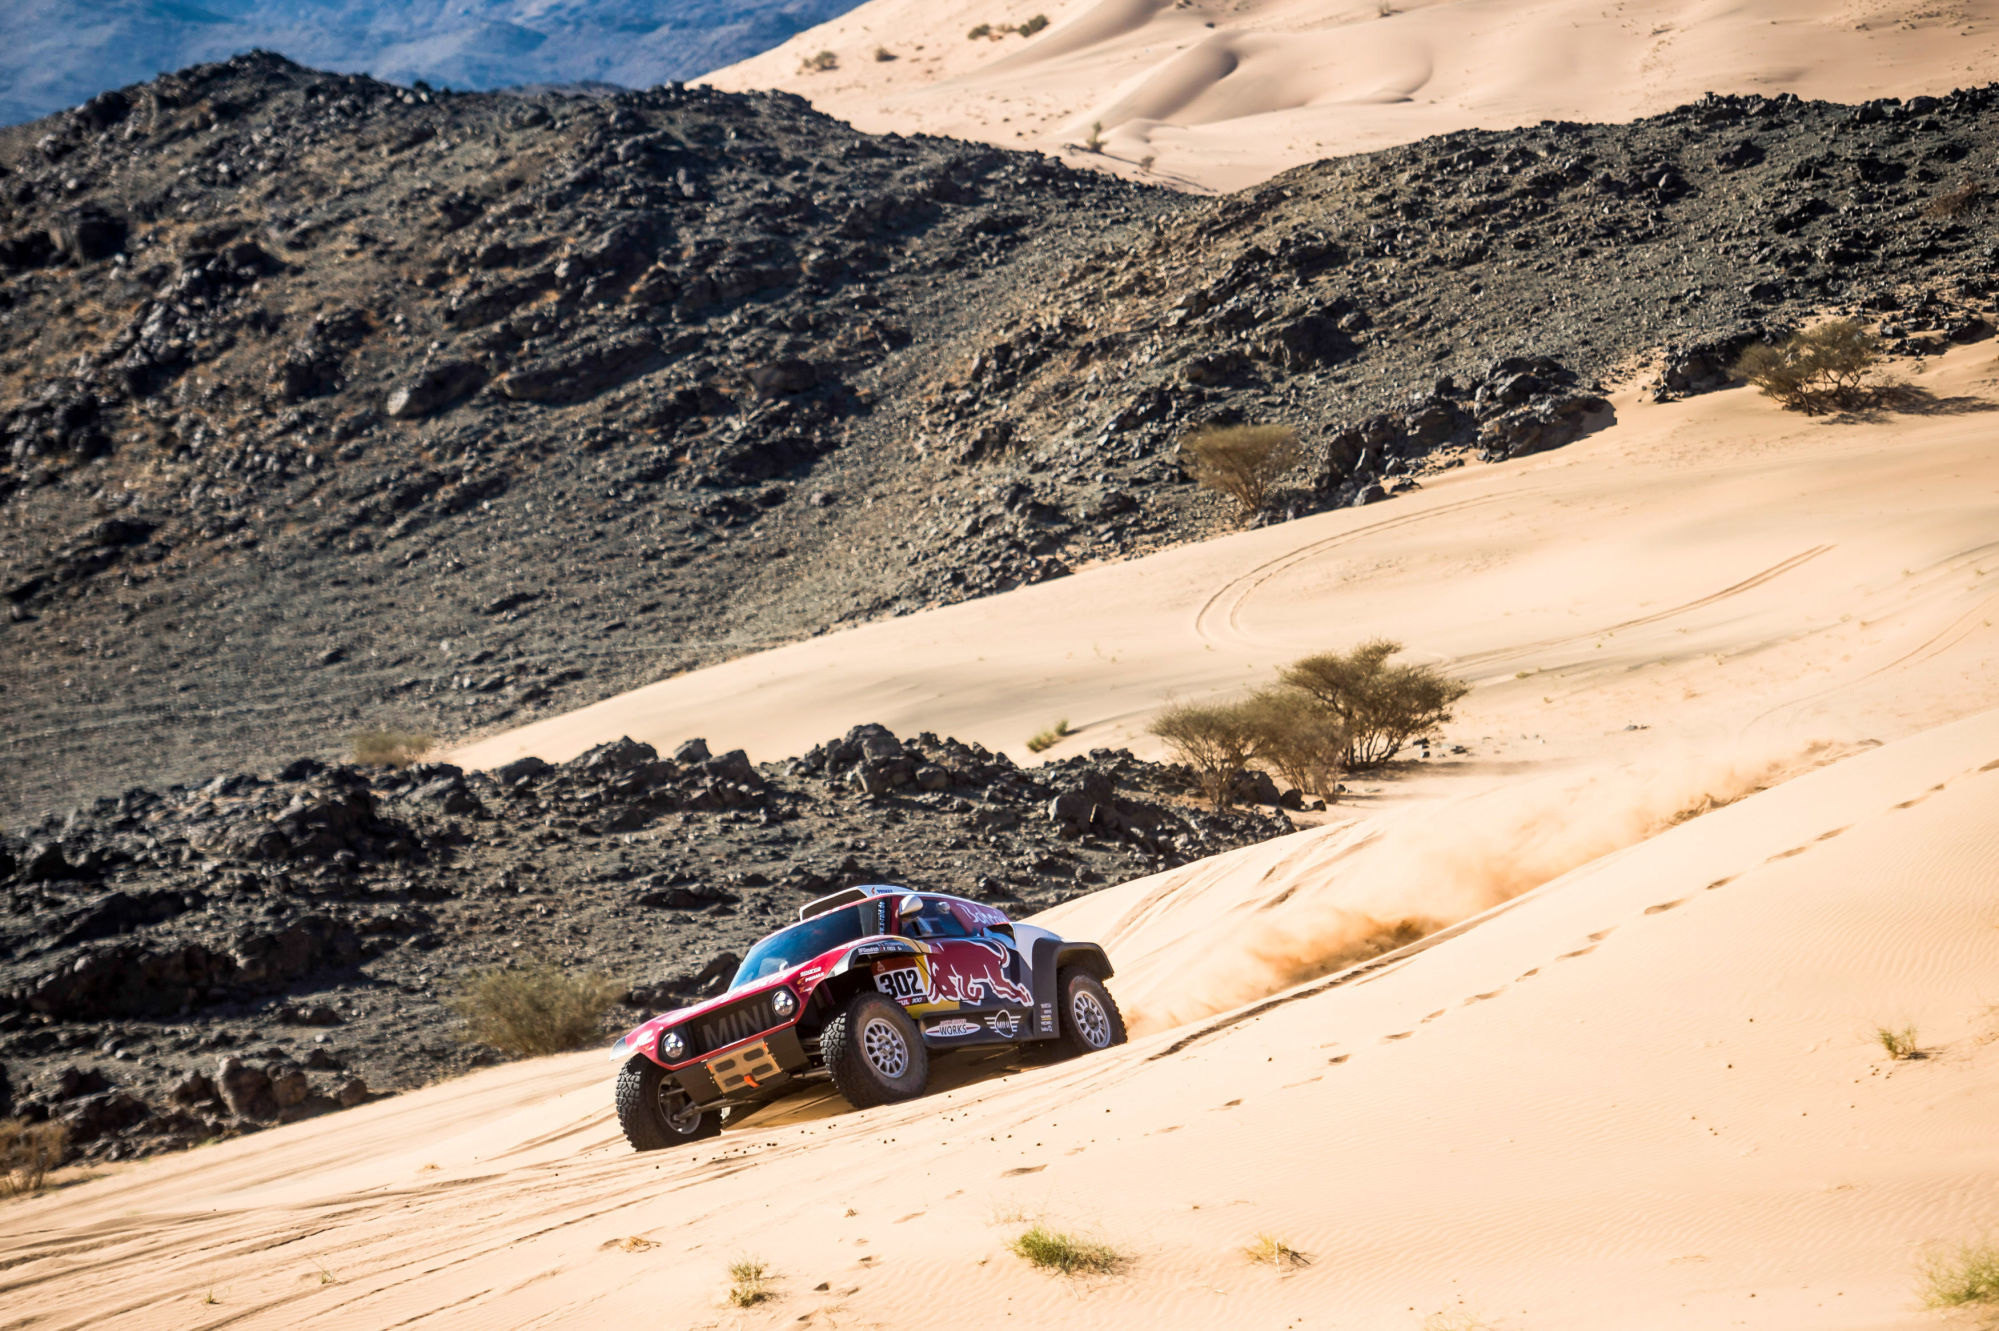 AL WAJH,SAUDI ARABIA,05.JAN.20 - MOTORSPORTS, RALLY - Rally Dakar 2020, stage 1, Jeddah - Al Wajh. Image shows Stephane Peterhansel (FRA) and Paulo Fiuza (POR/ Mini). Photo: GEPA pictures/ Red Bull Content Pool/ Marcelo Maragni - ATTENTION - FREE OF CHARGE FOR EDITORIAL USE 

Photo by Icon Sport -  (Arabie Saoudite )